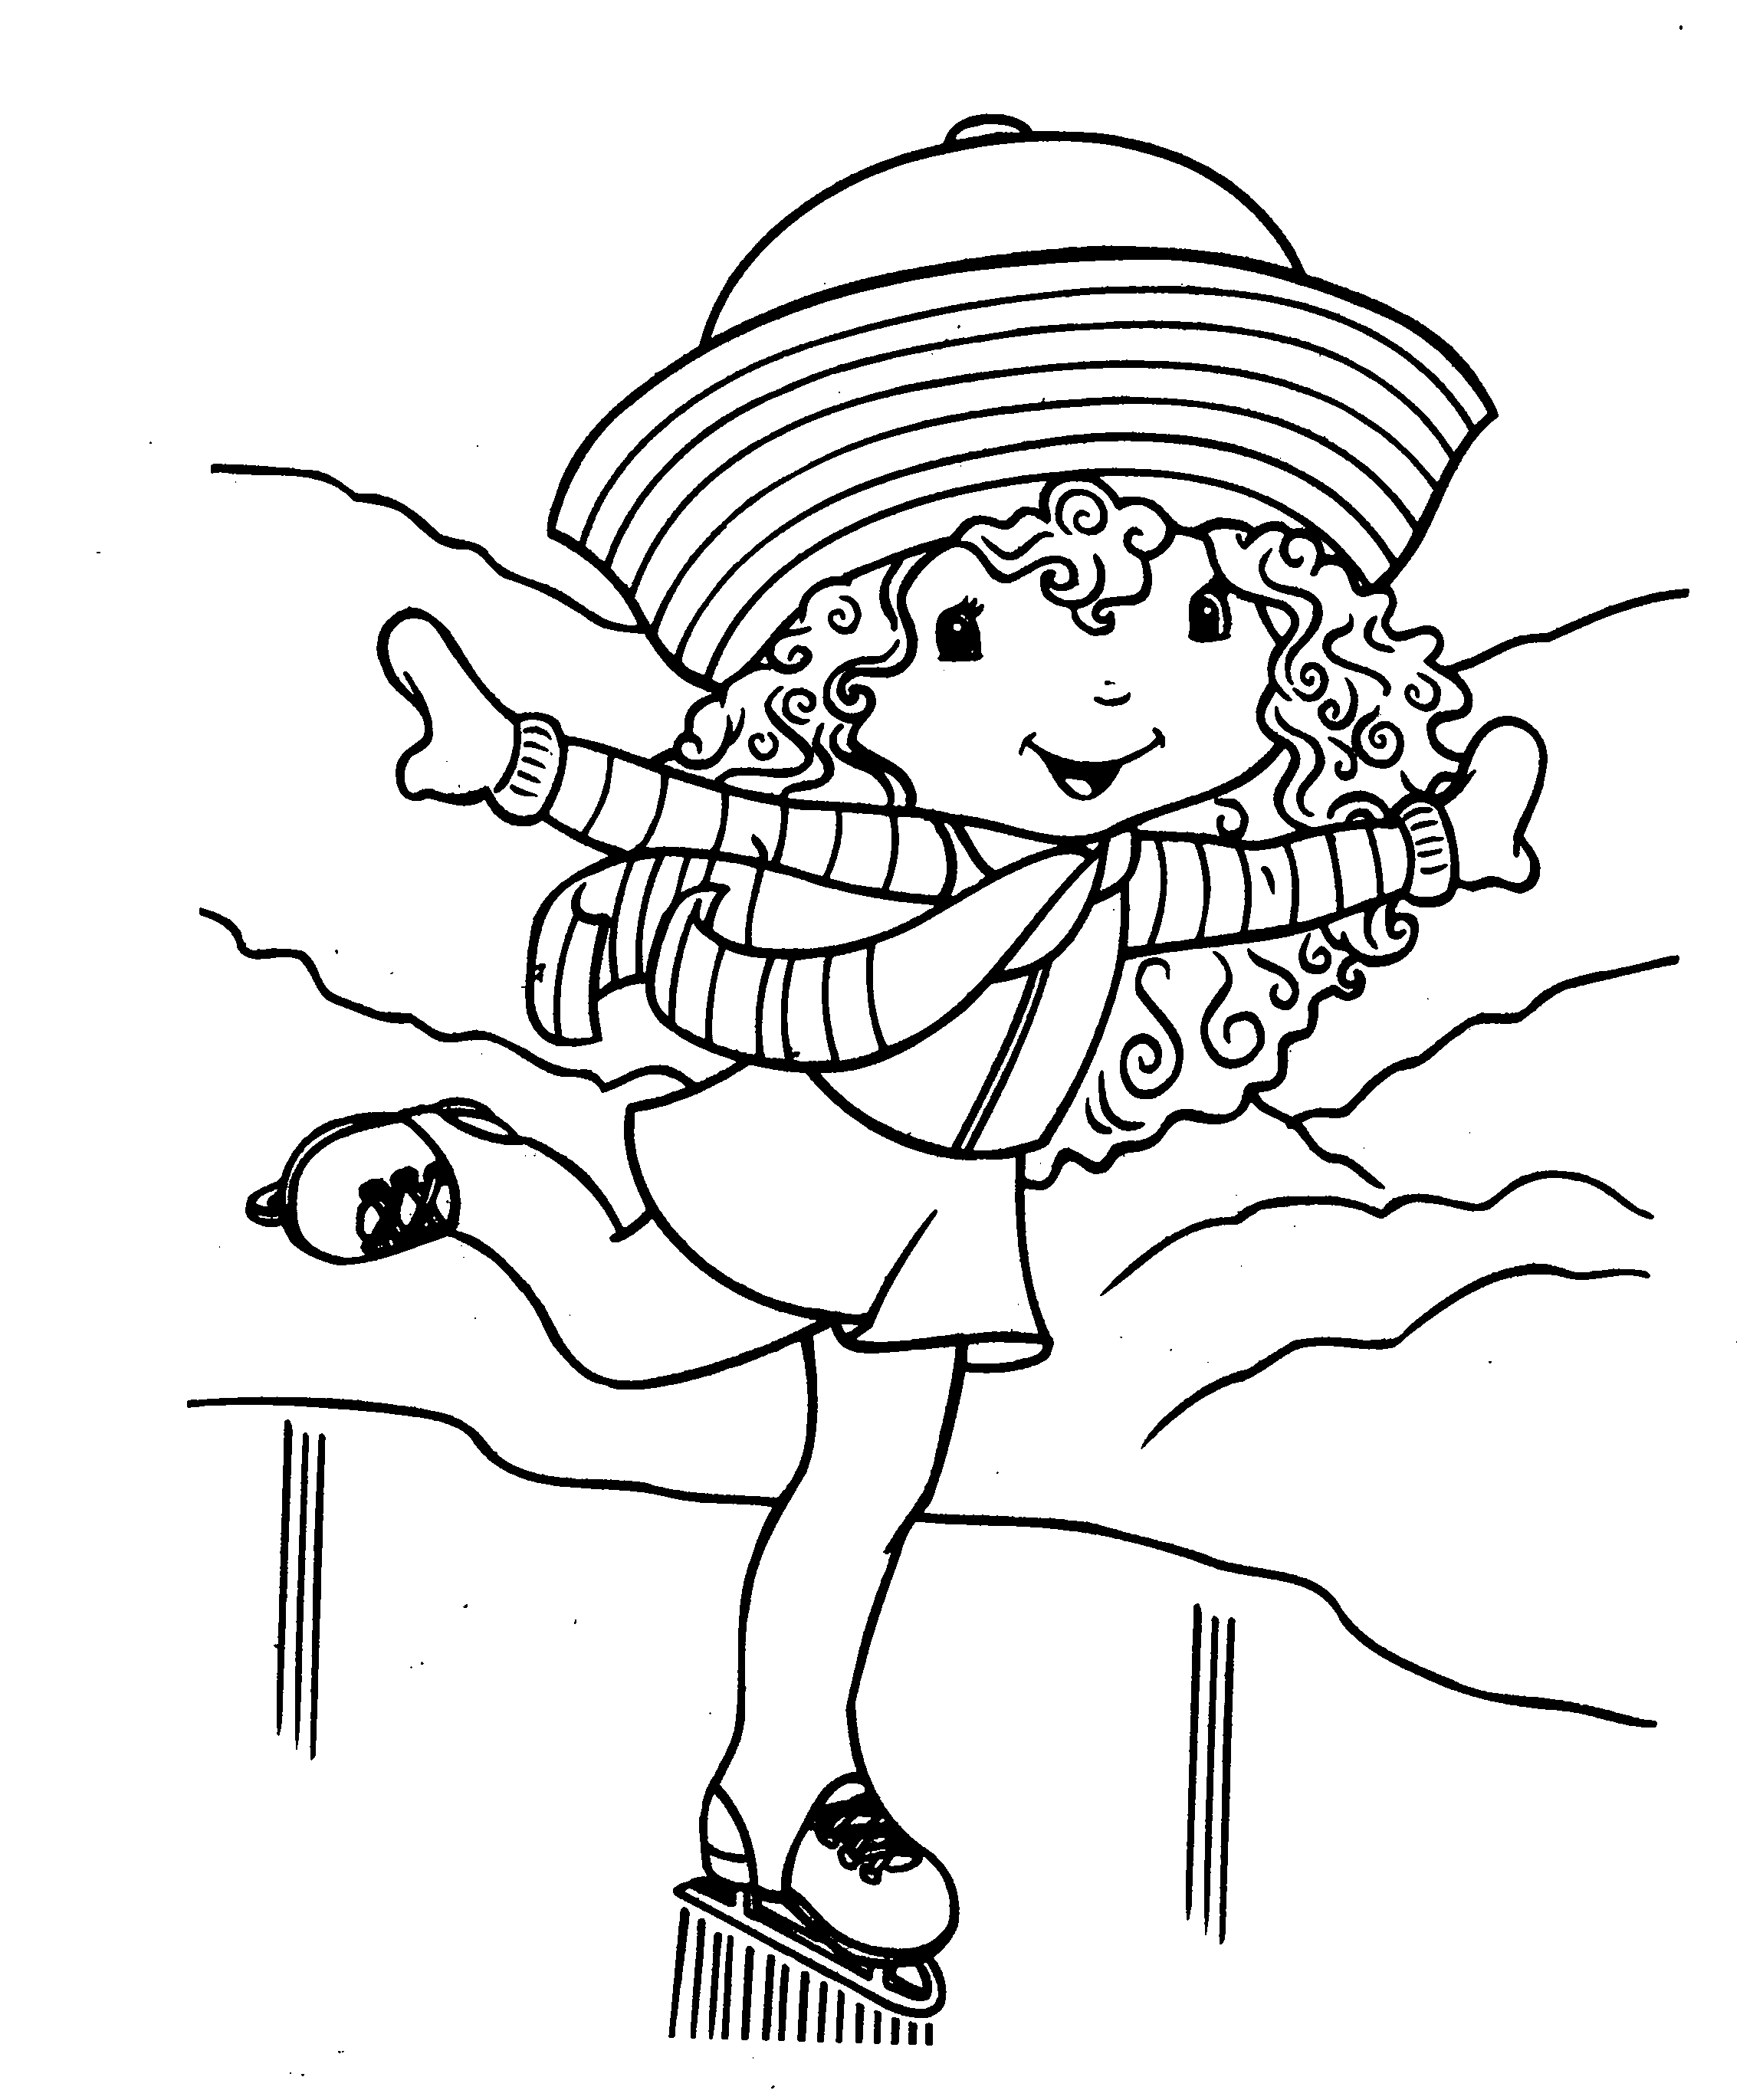 Strawberry shortcake coloring pages to print for free